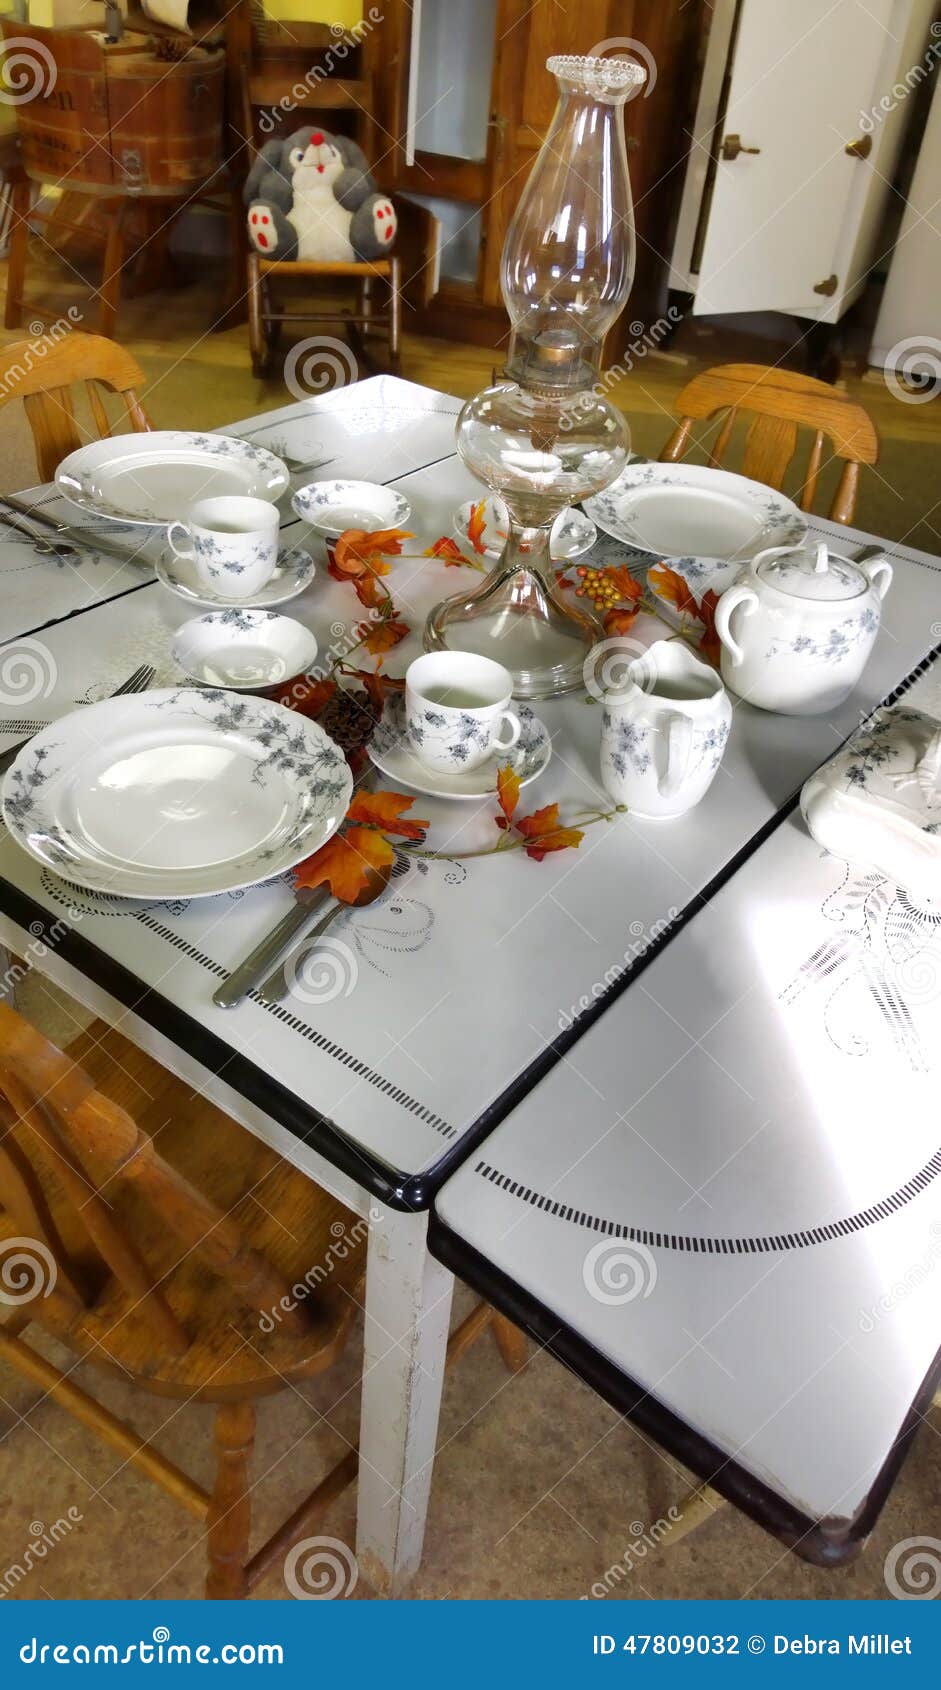  old fashioned kitchen tables